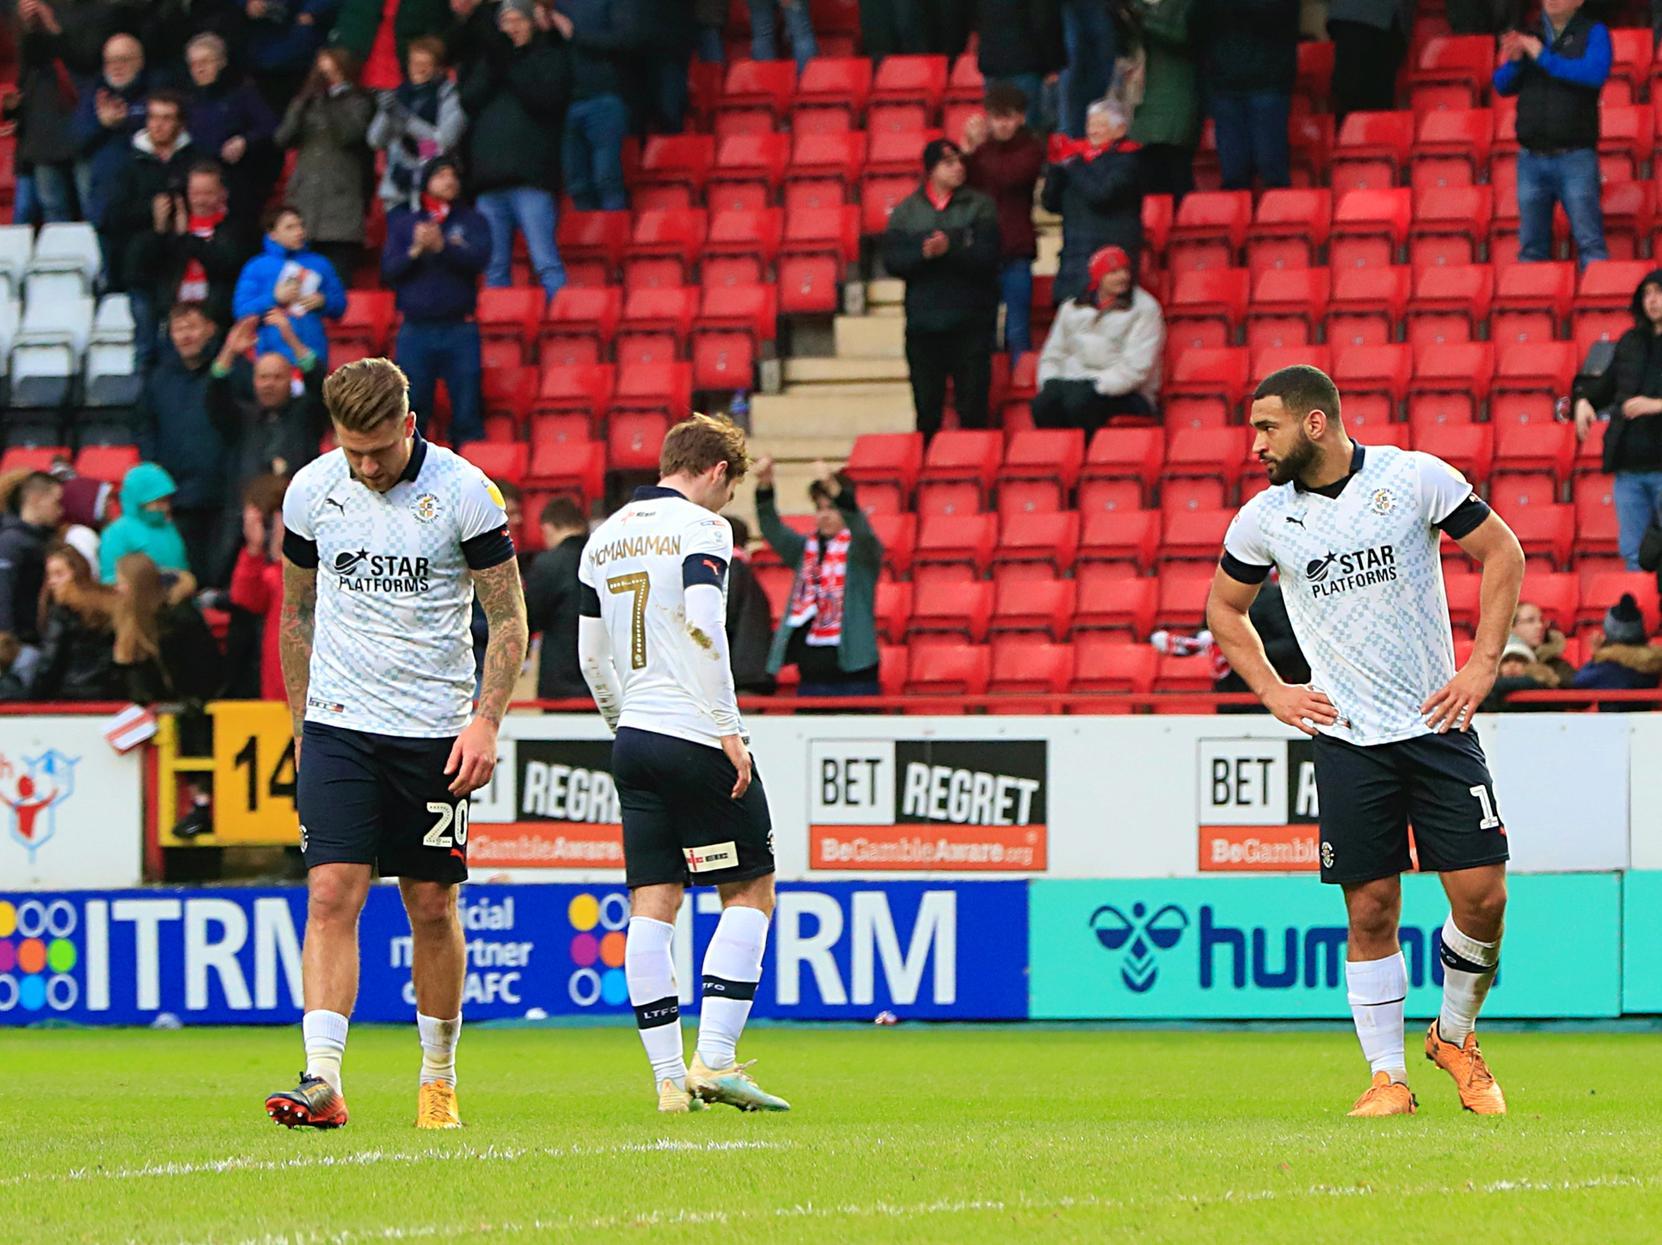 Luton are left to reflect on yet another defeat, losing 3-1 at Charlton on Saturday